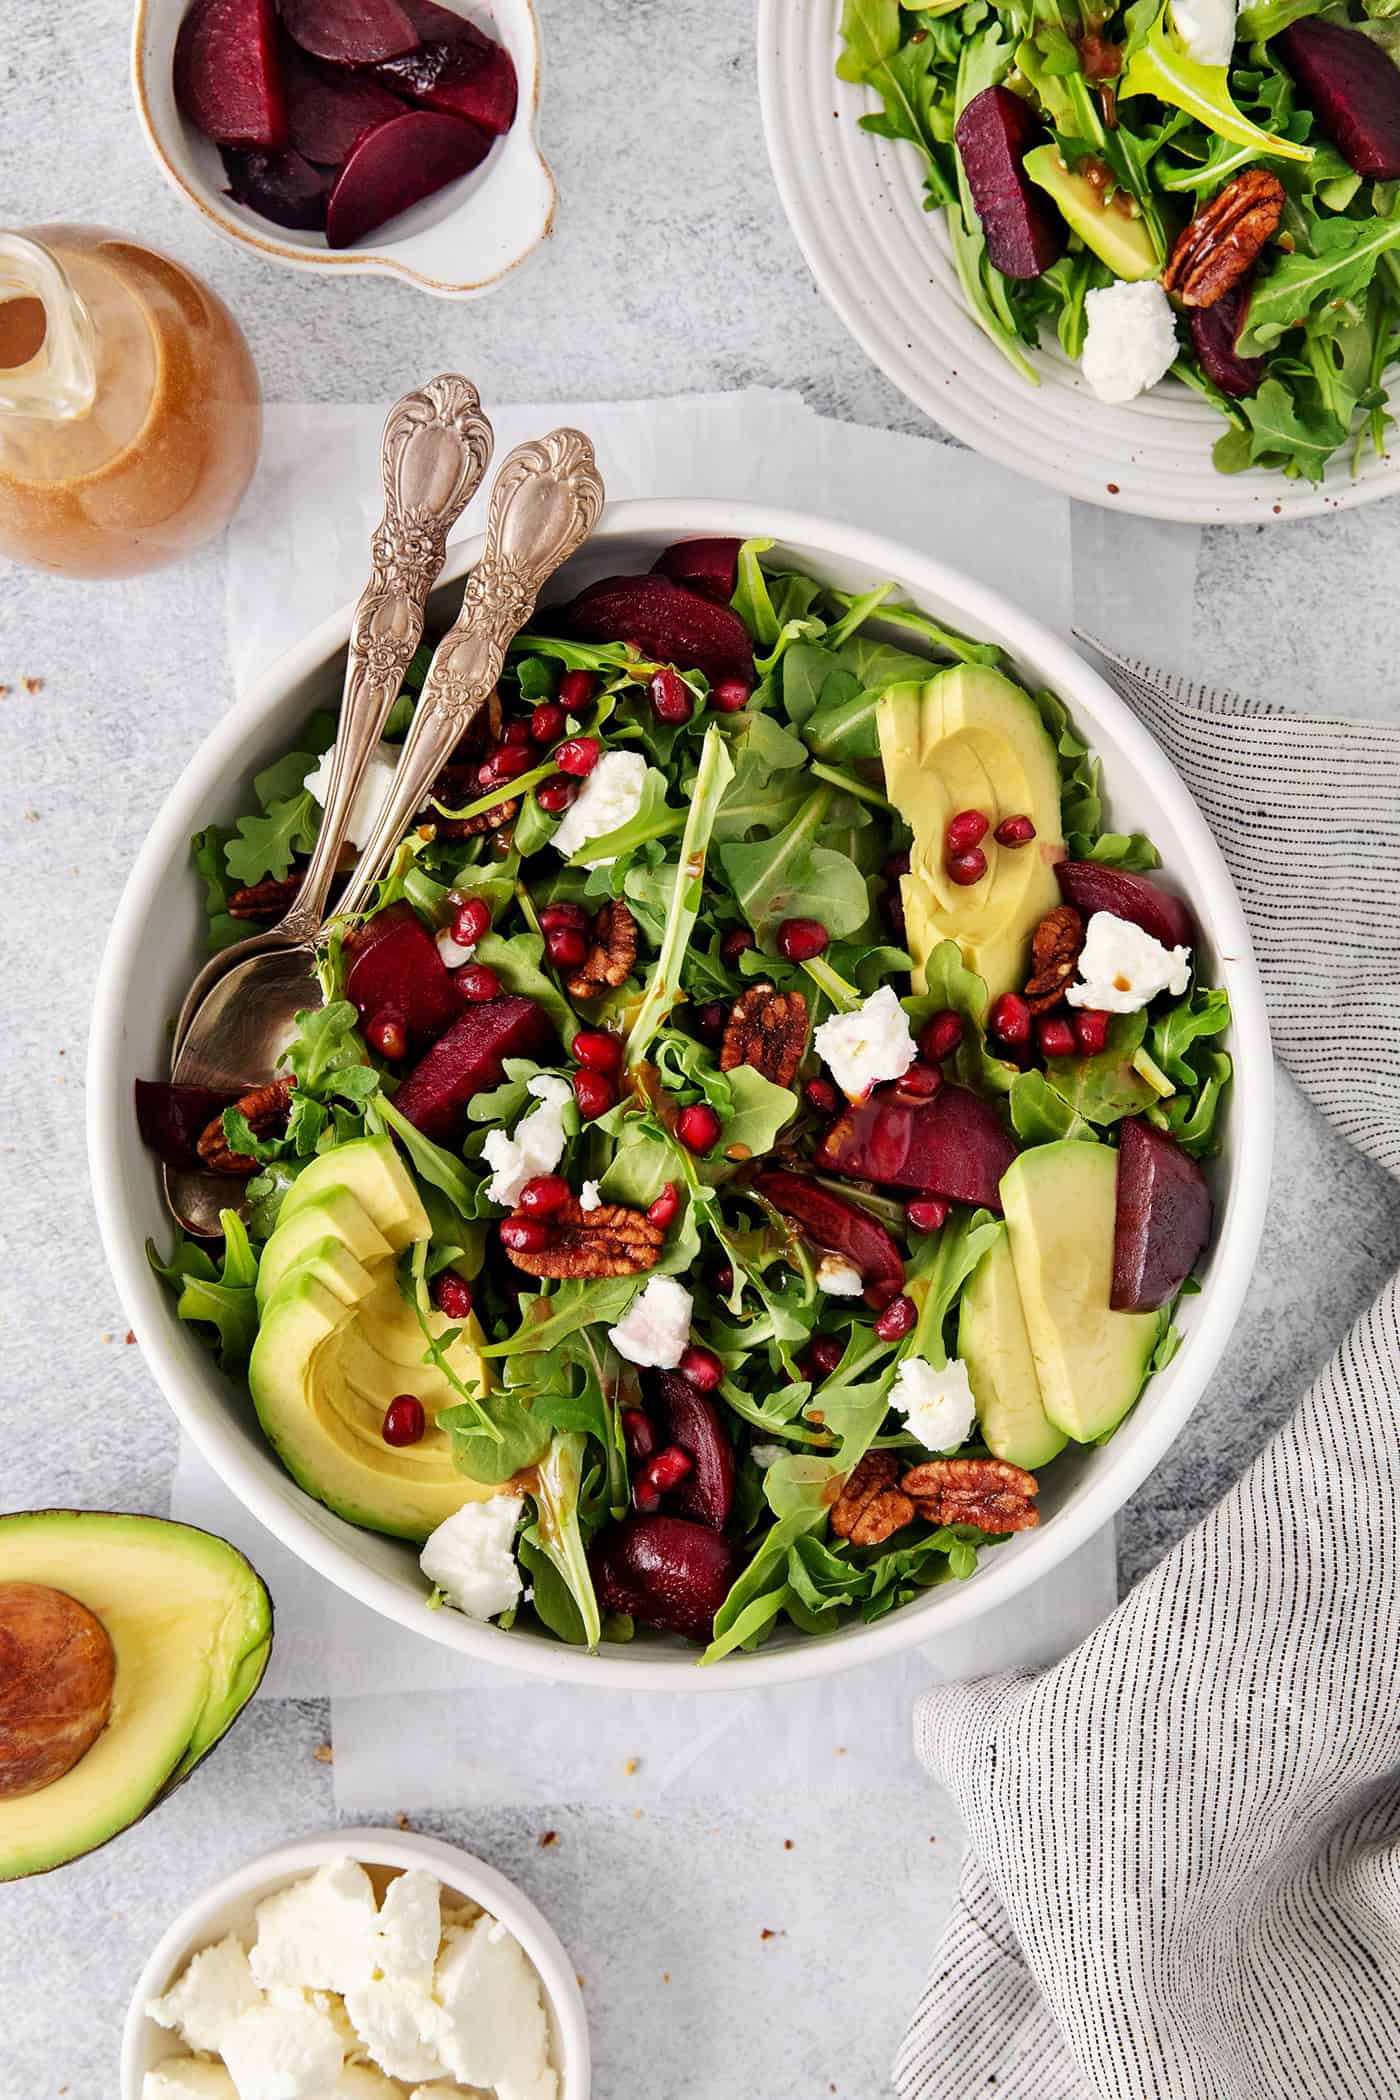 Arugula beet salad topped with pomegranate